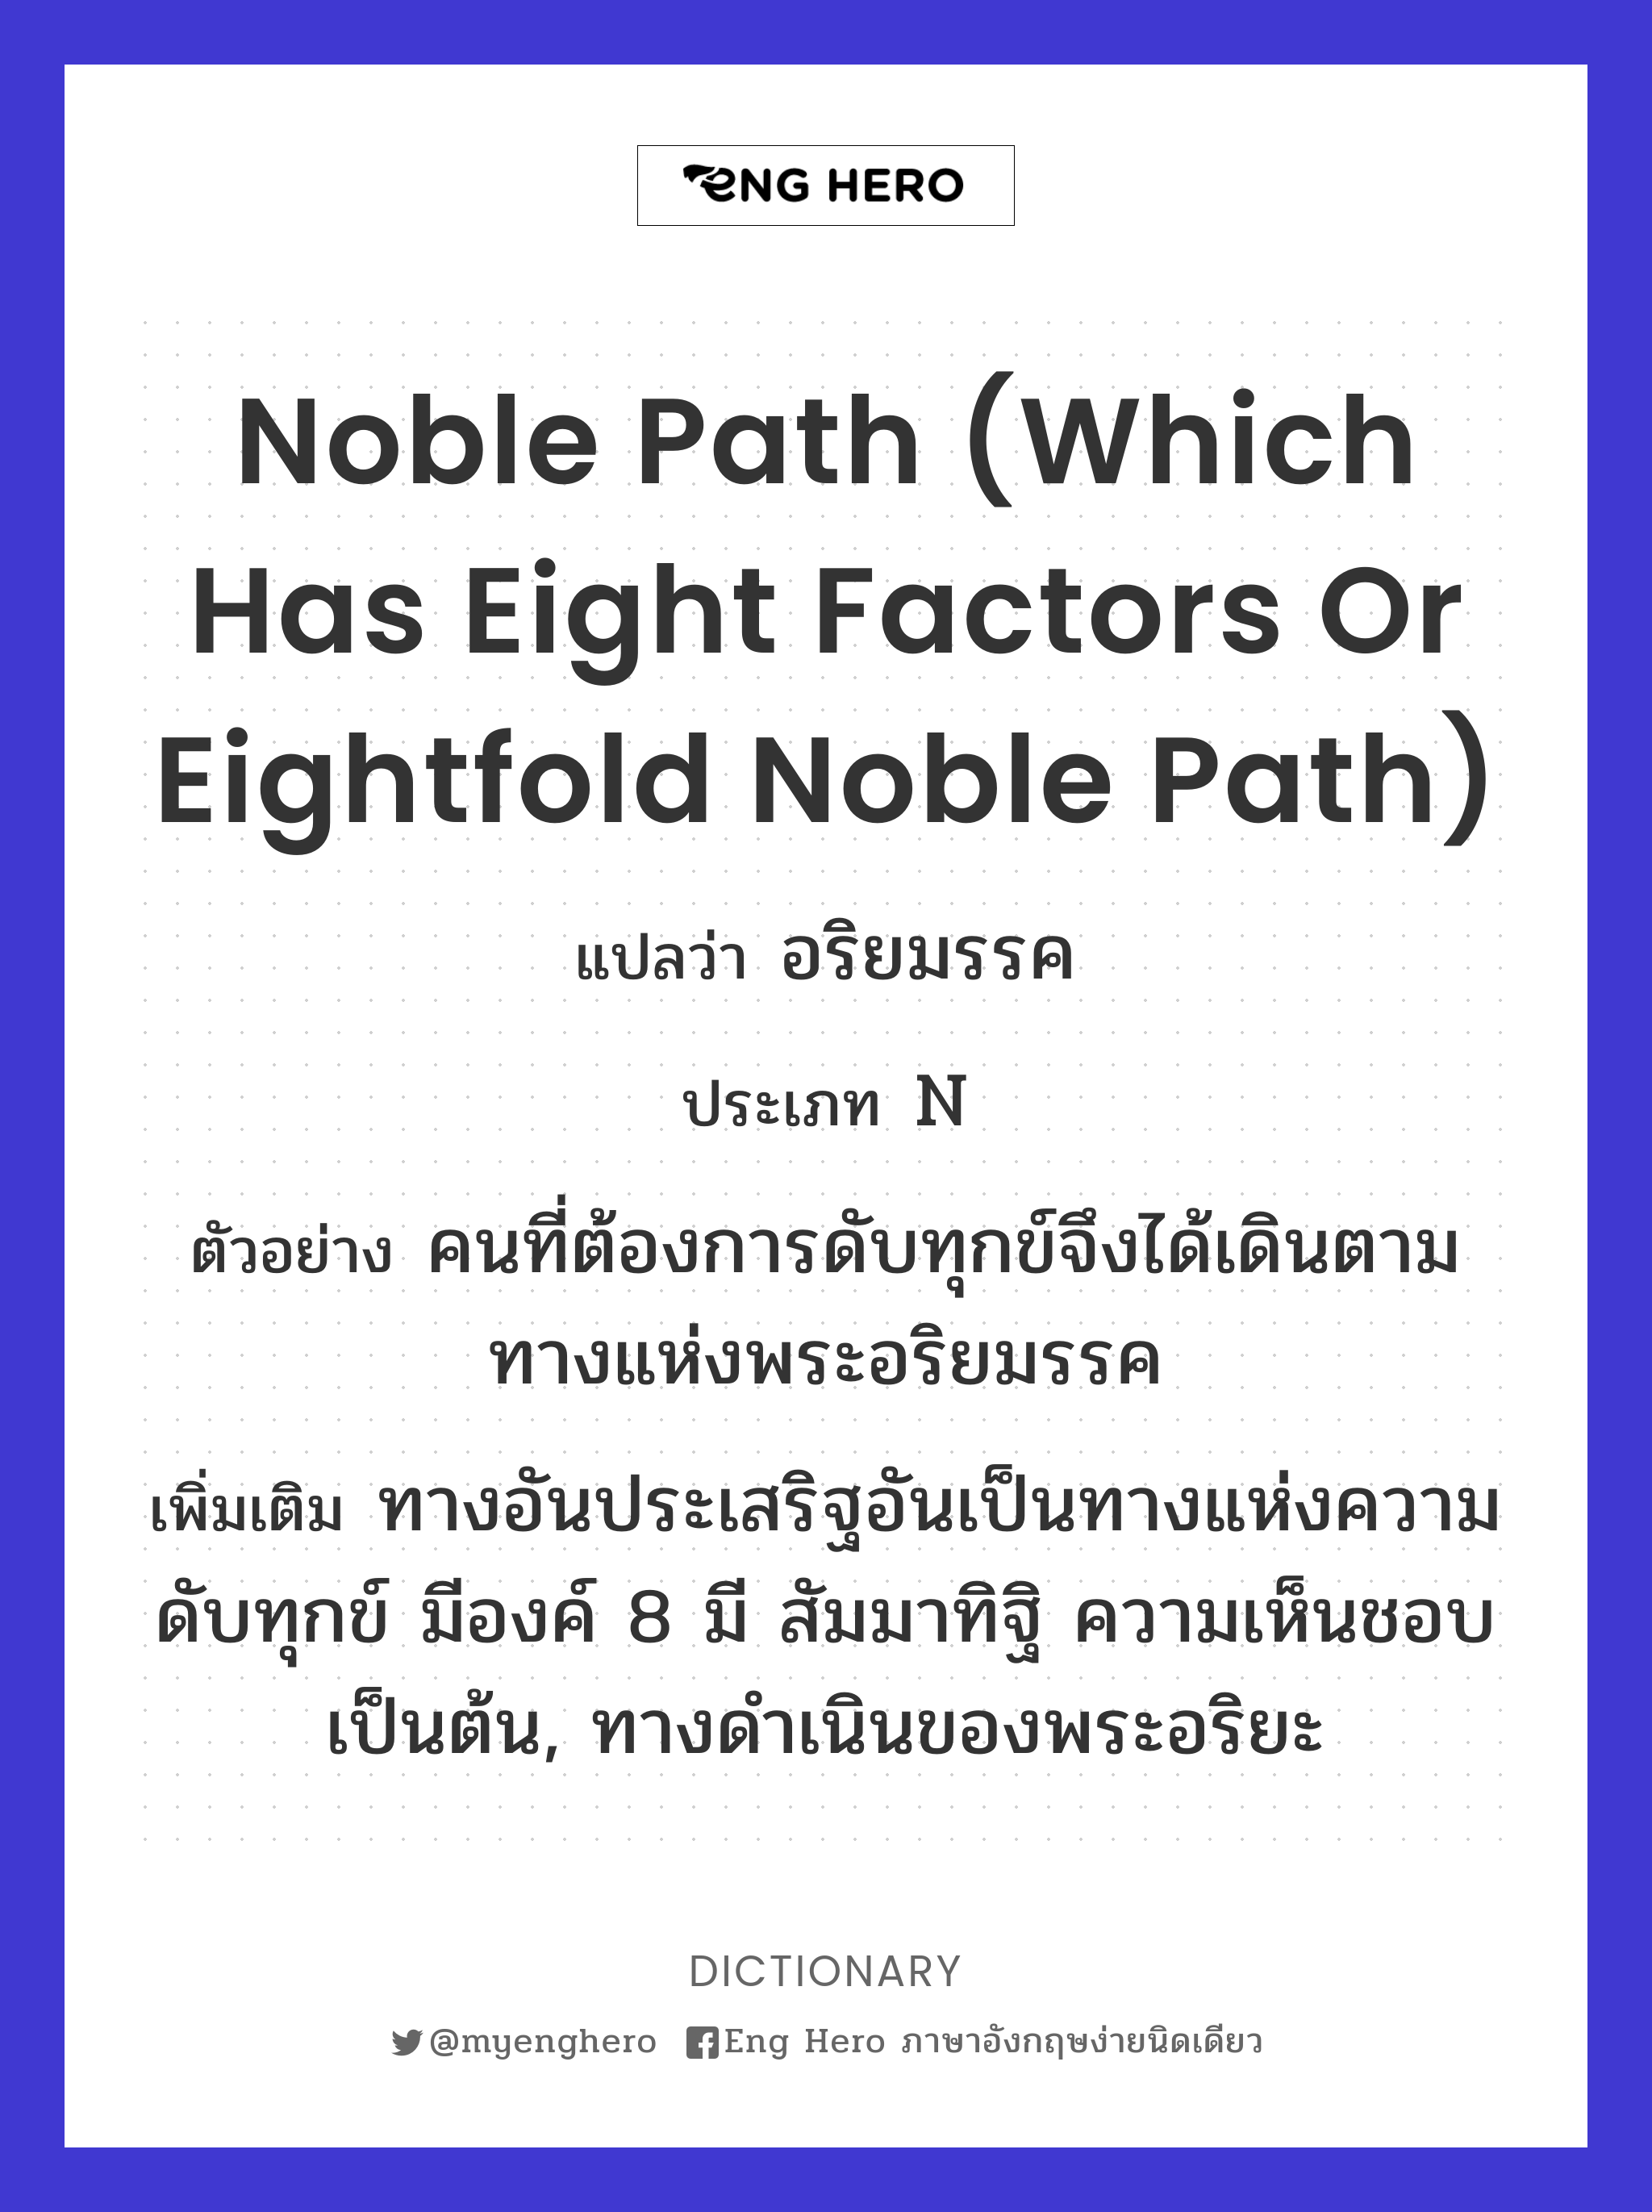 noble path (which has eight factors or eightfold noble path)